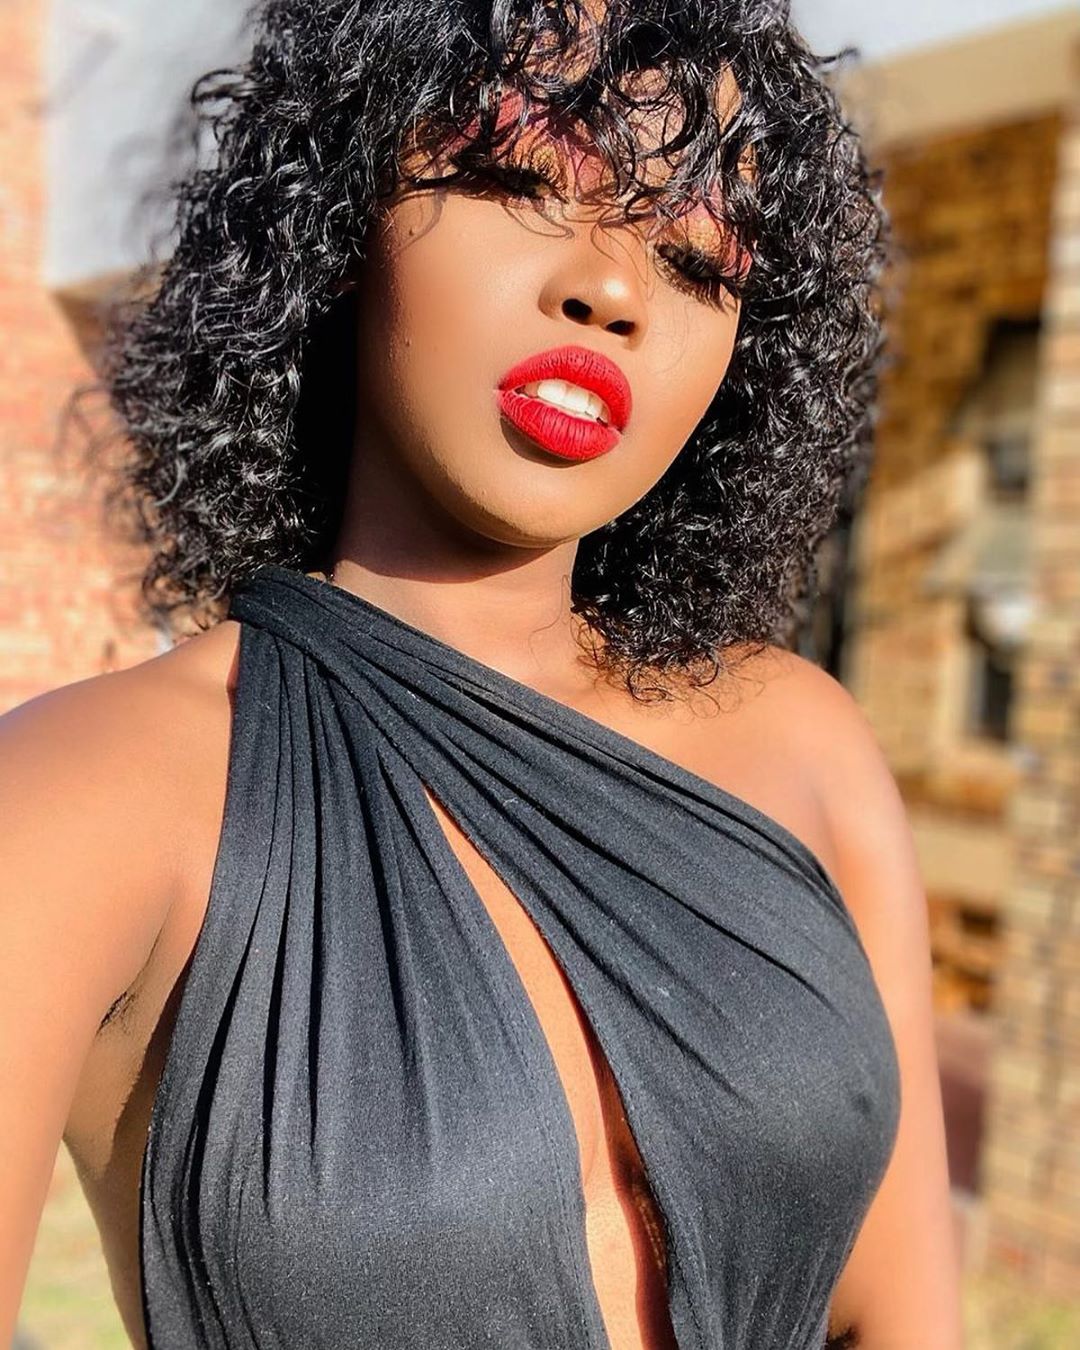 Zodwa Wabantu's fans slam Dr Mbali from Durban Gen for being a diva